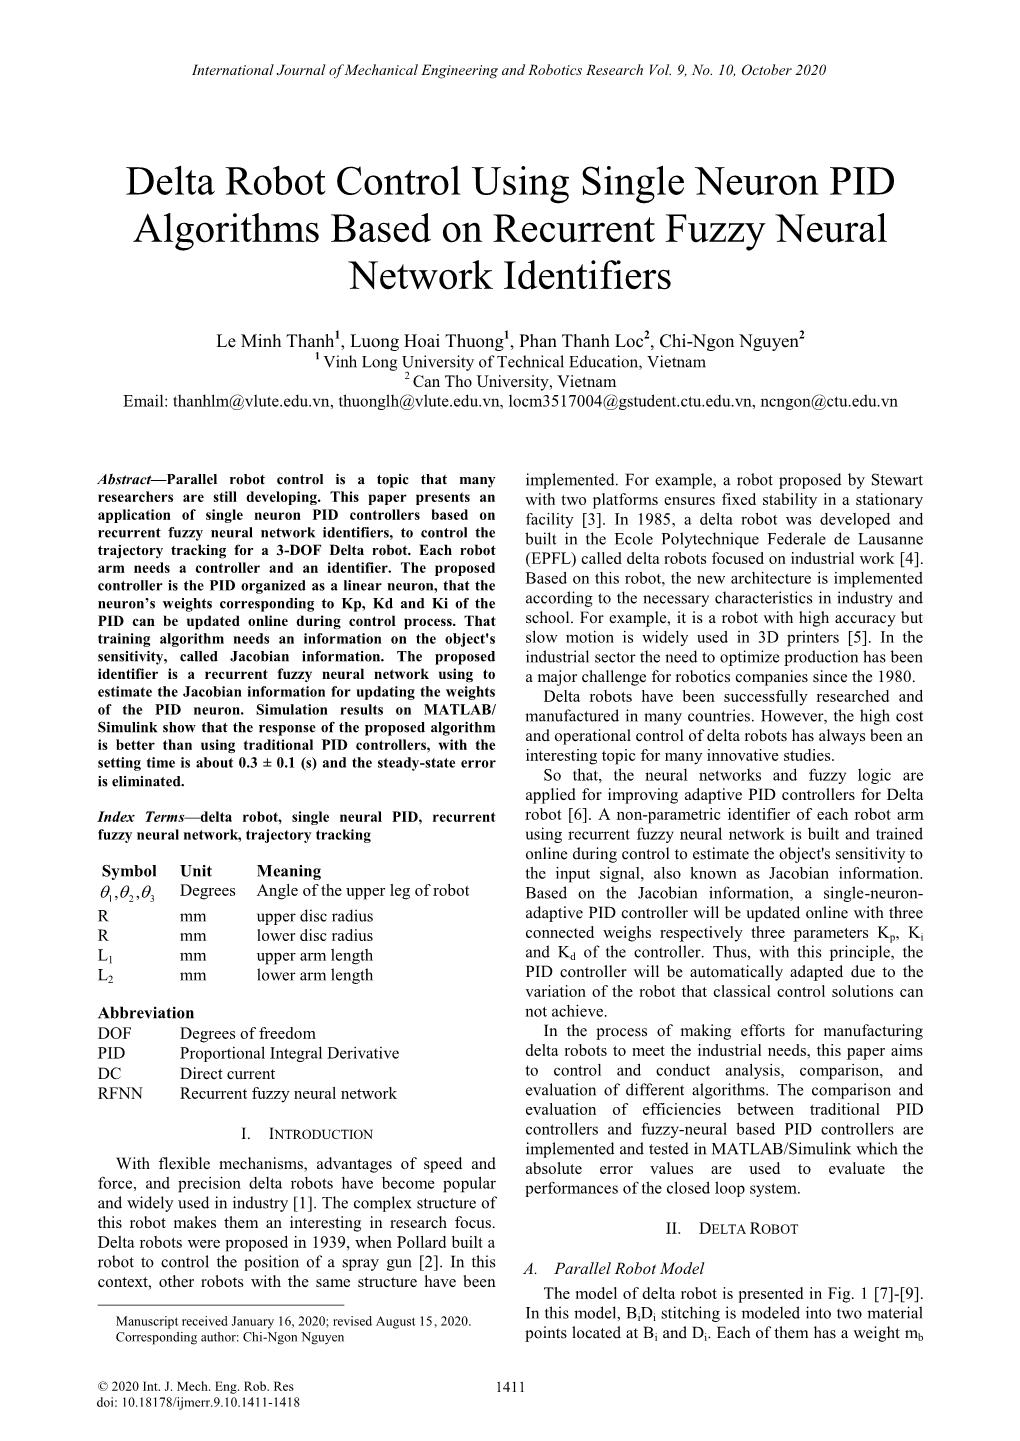 Delta Robot Control Using Single Neuron PID Algorithms Based on Recurrent Fuzzy Neural Network Identifiers